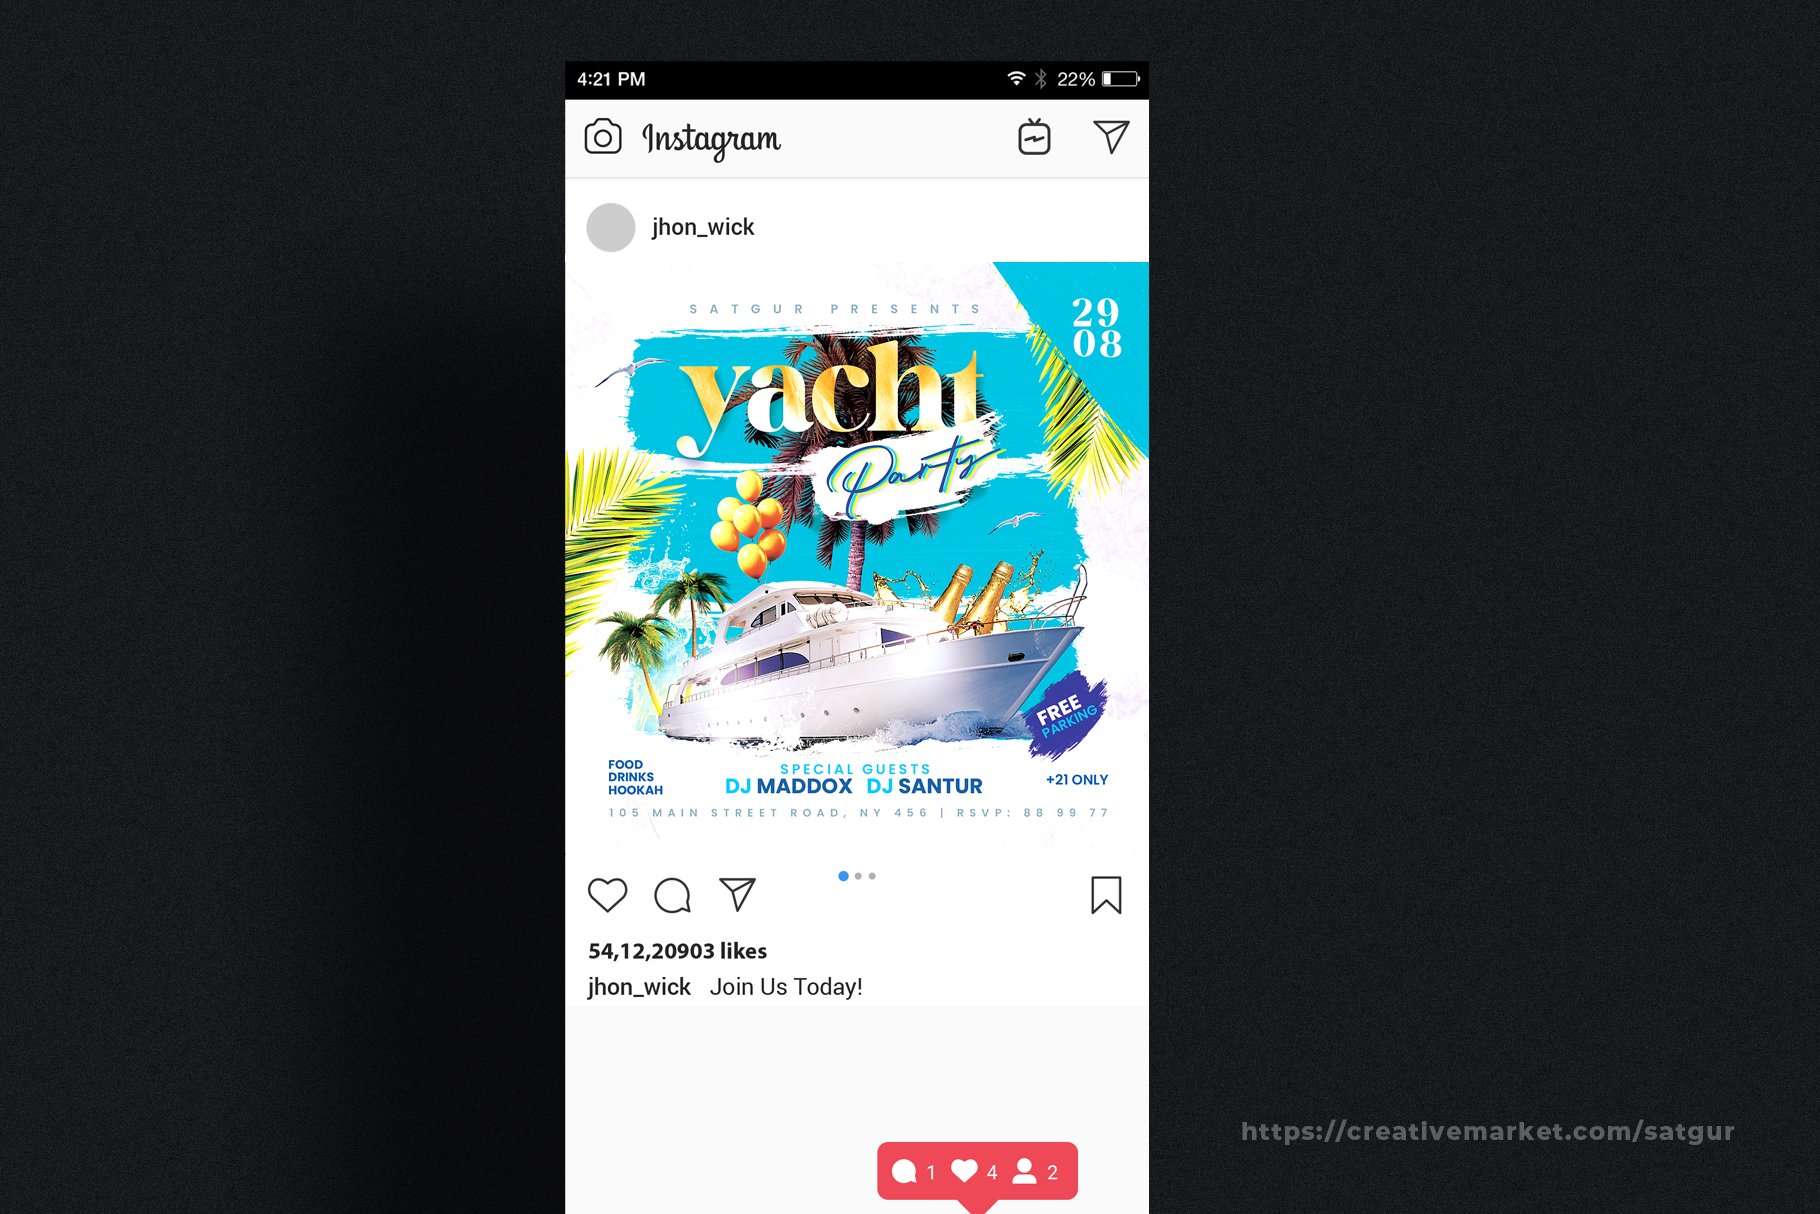 preview yacht party flyer template psd creativemarket 3 129